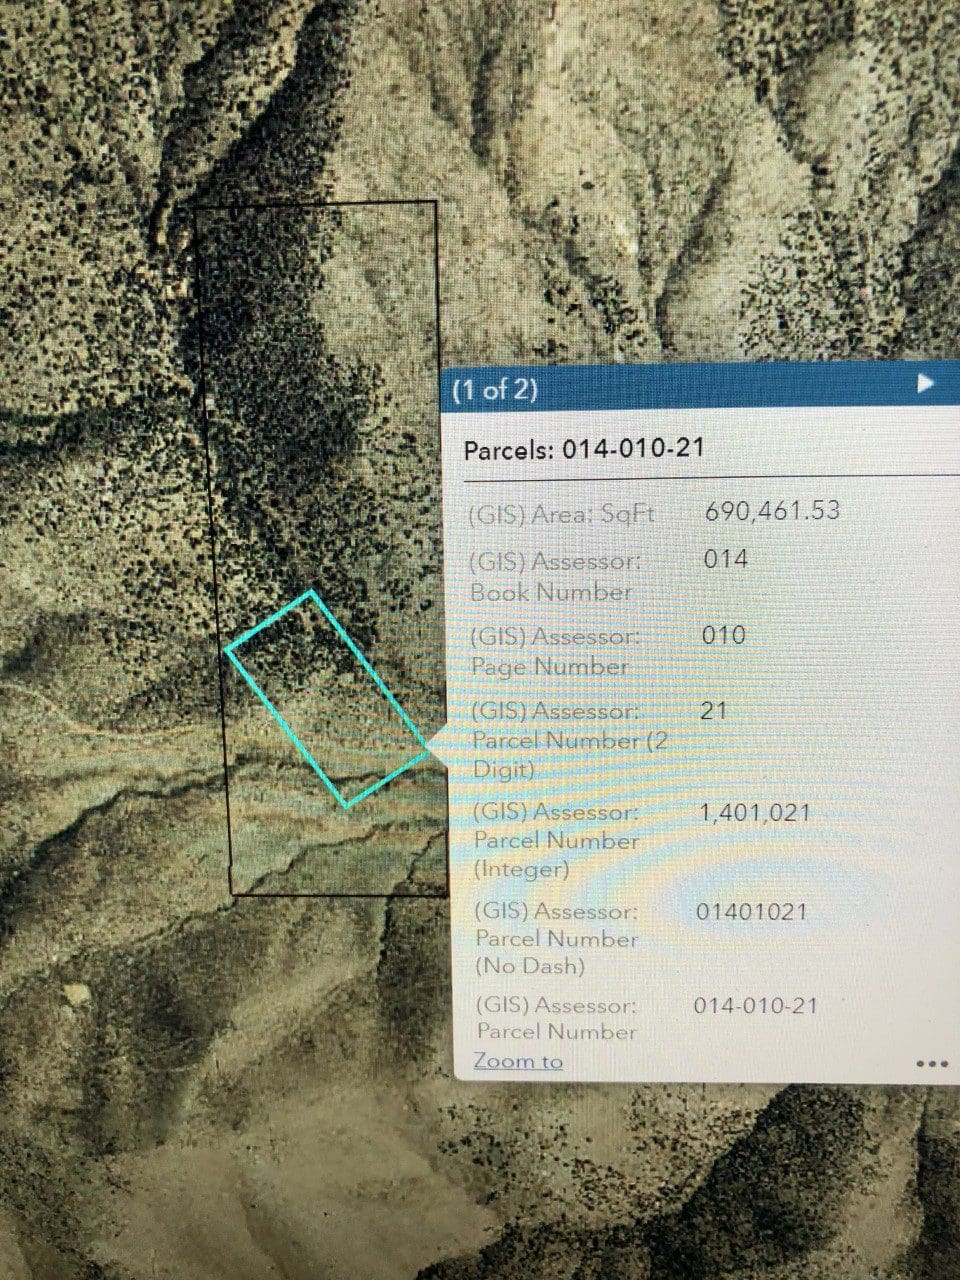 15.84 Acres in GOLD NOTE CANYON, HIDDEN TREASURE #1, SUR 2097 – A PATENTED MINING CLAIM -PAST PRODUCER OF GOLD, SILVER & ZINC photo 58